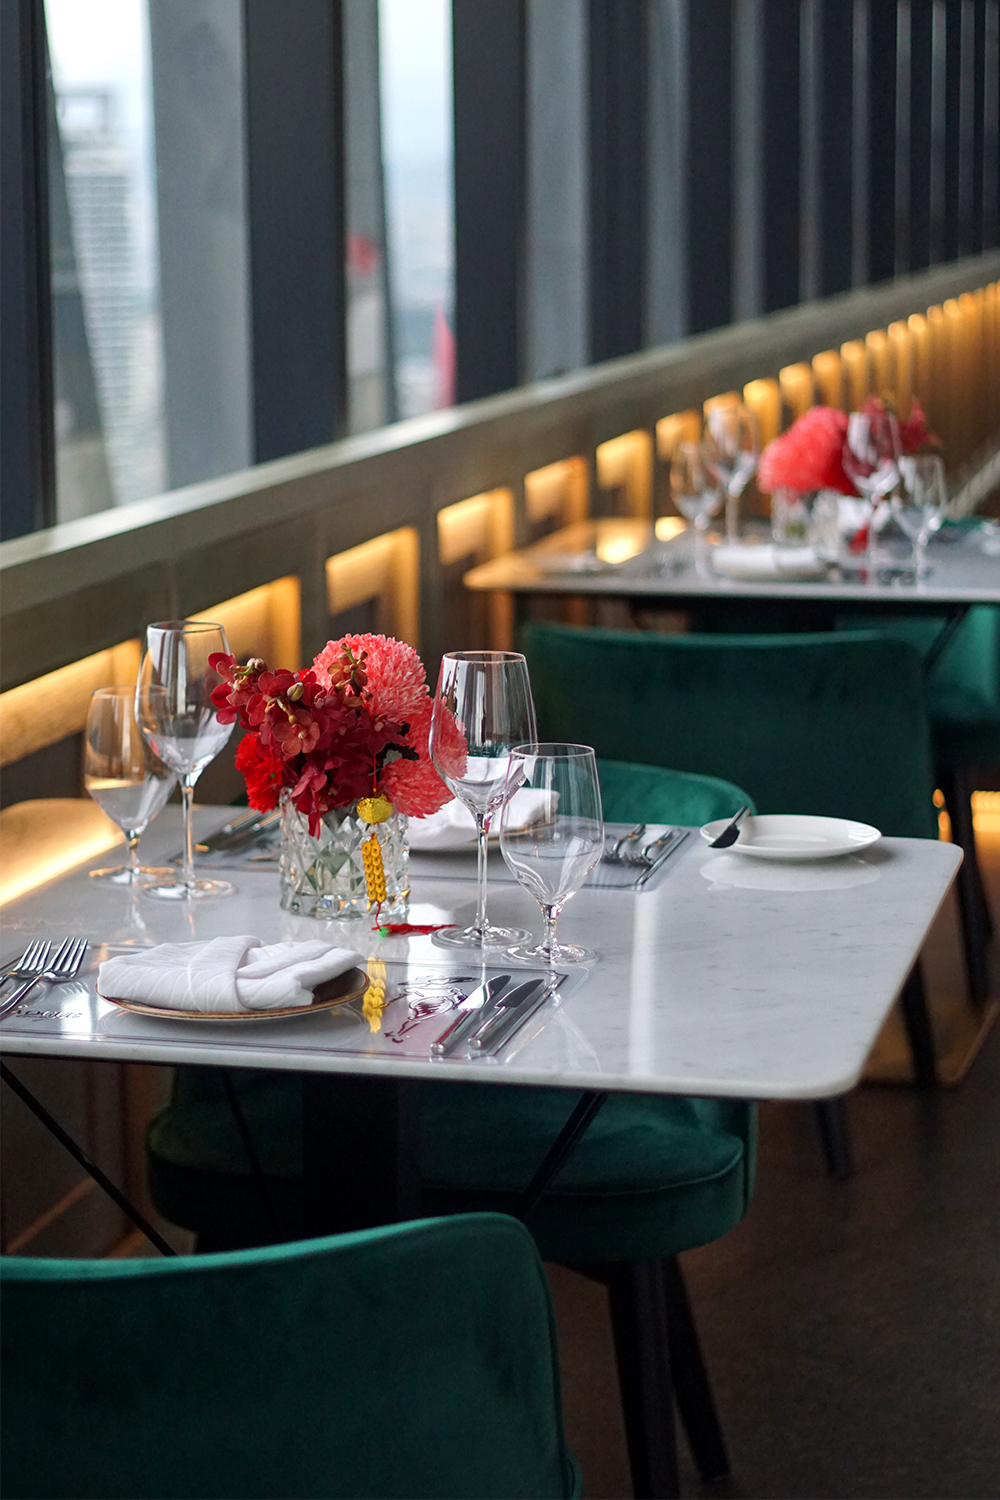 Review: Vogue Lounge KL serves fashionable dining with a side of views